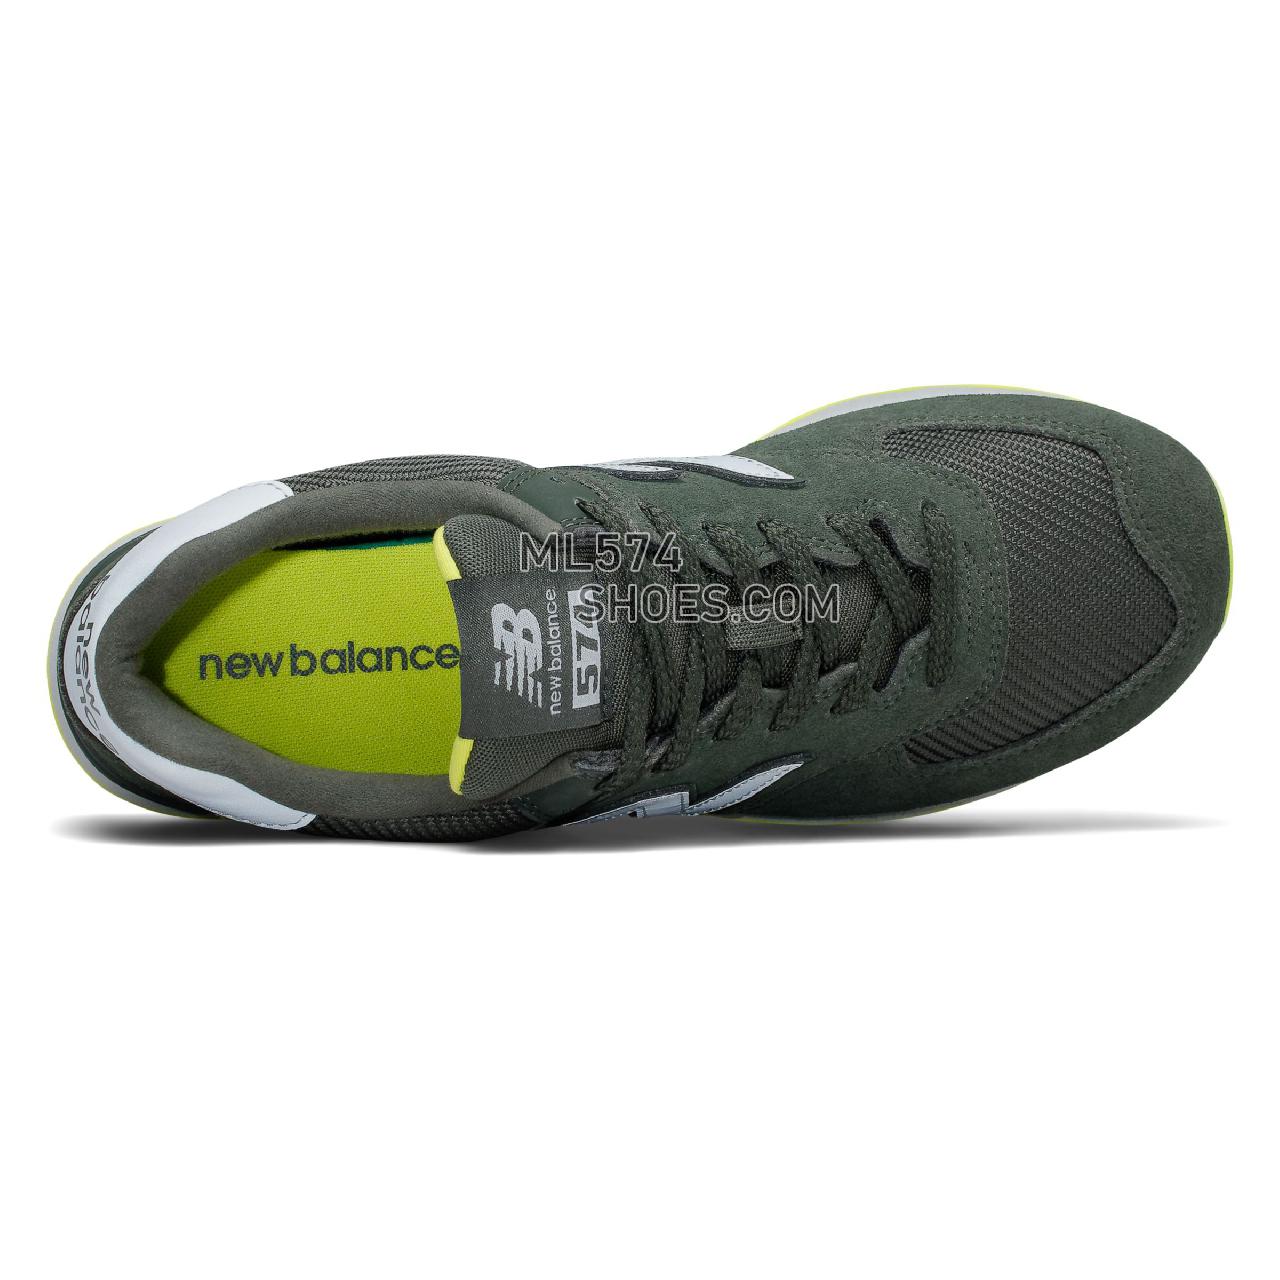 New Balance 574 - Men's Classic Sneakers - Defense Green with White and Sulphur Yellow - ML574JFF